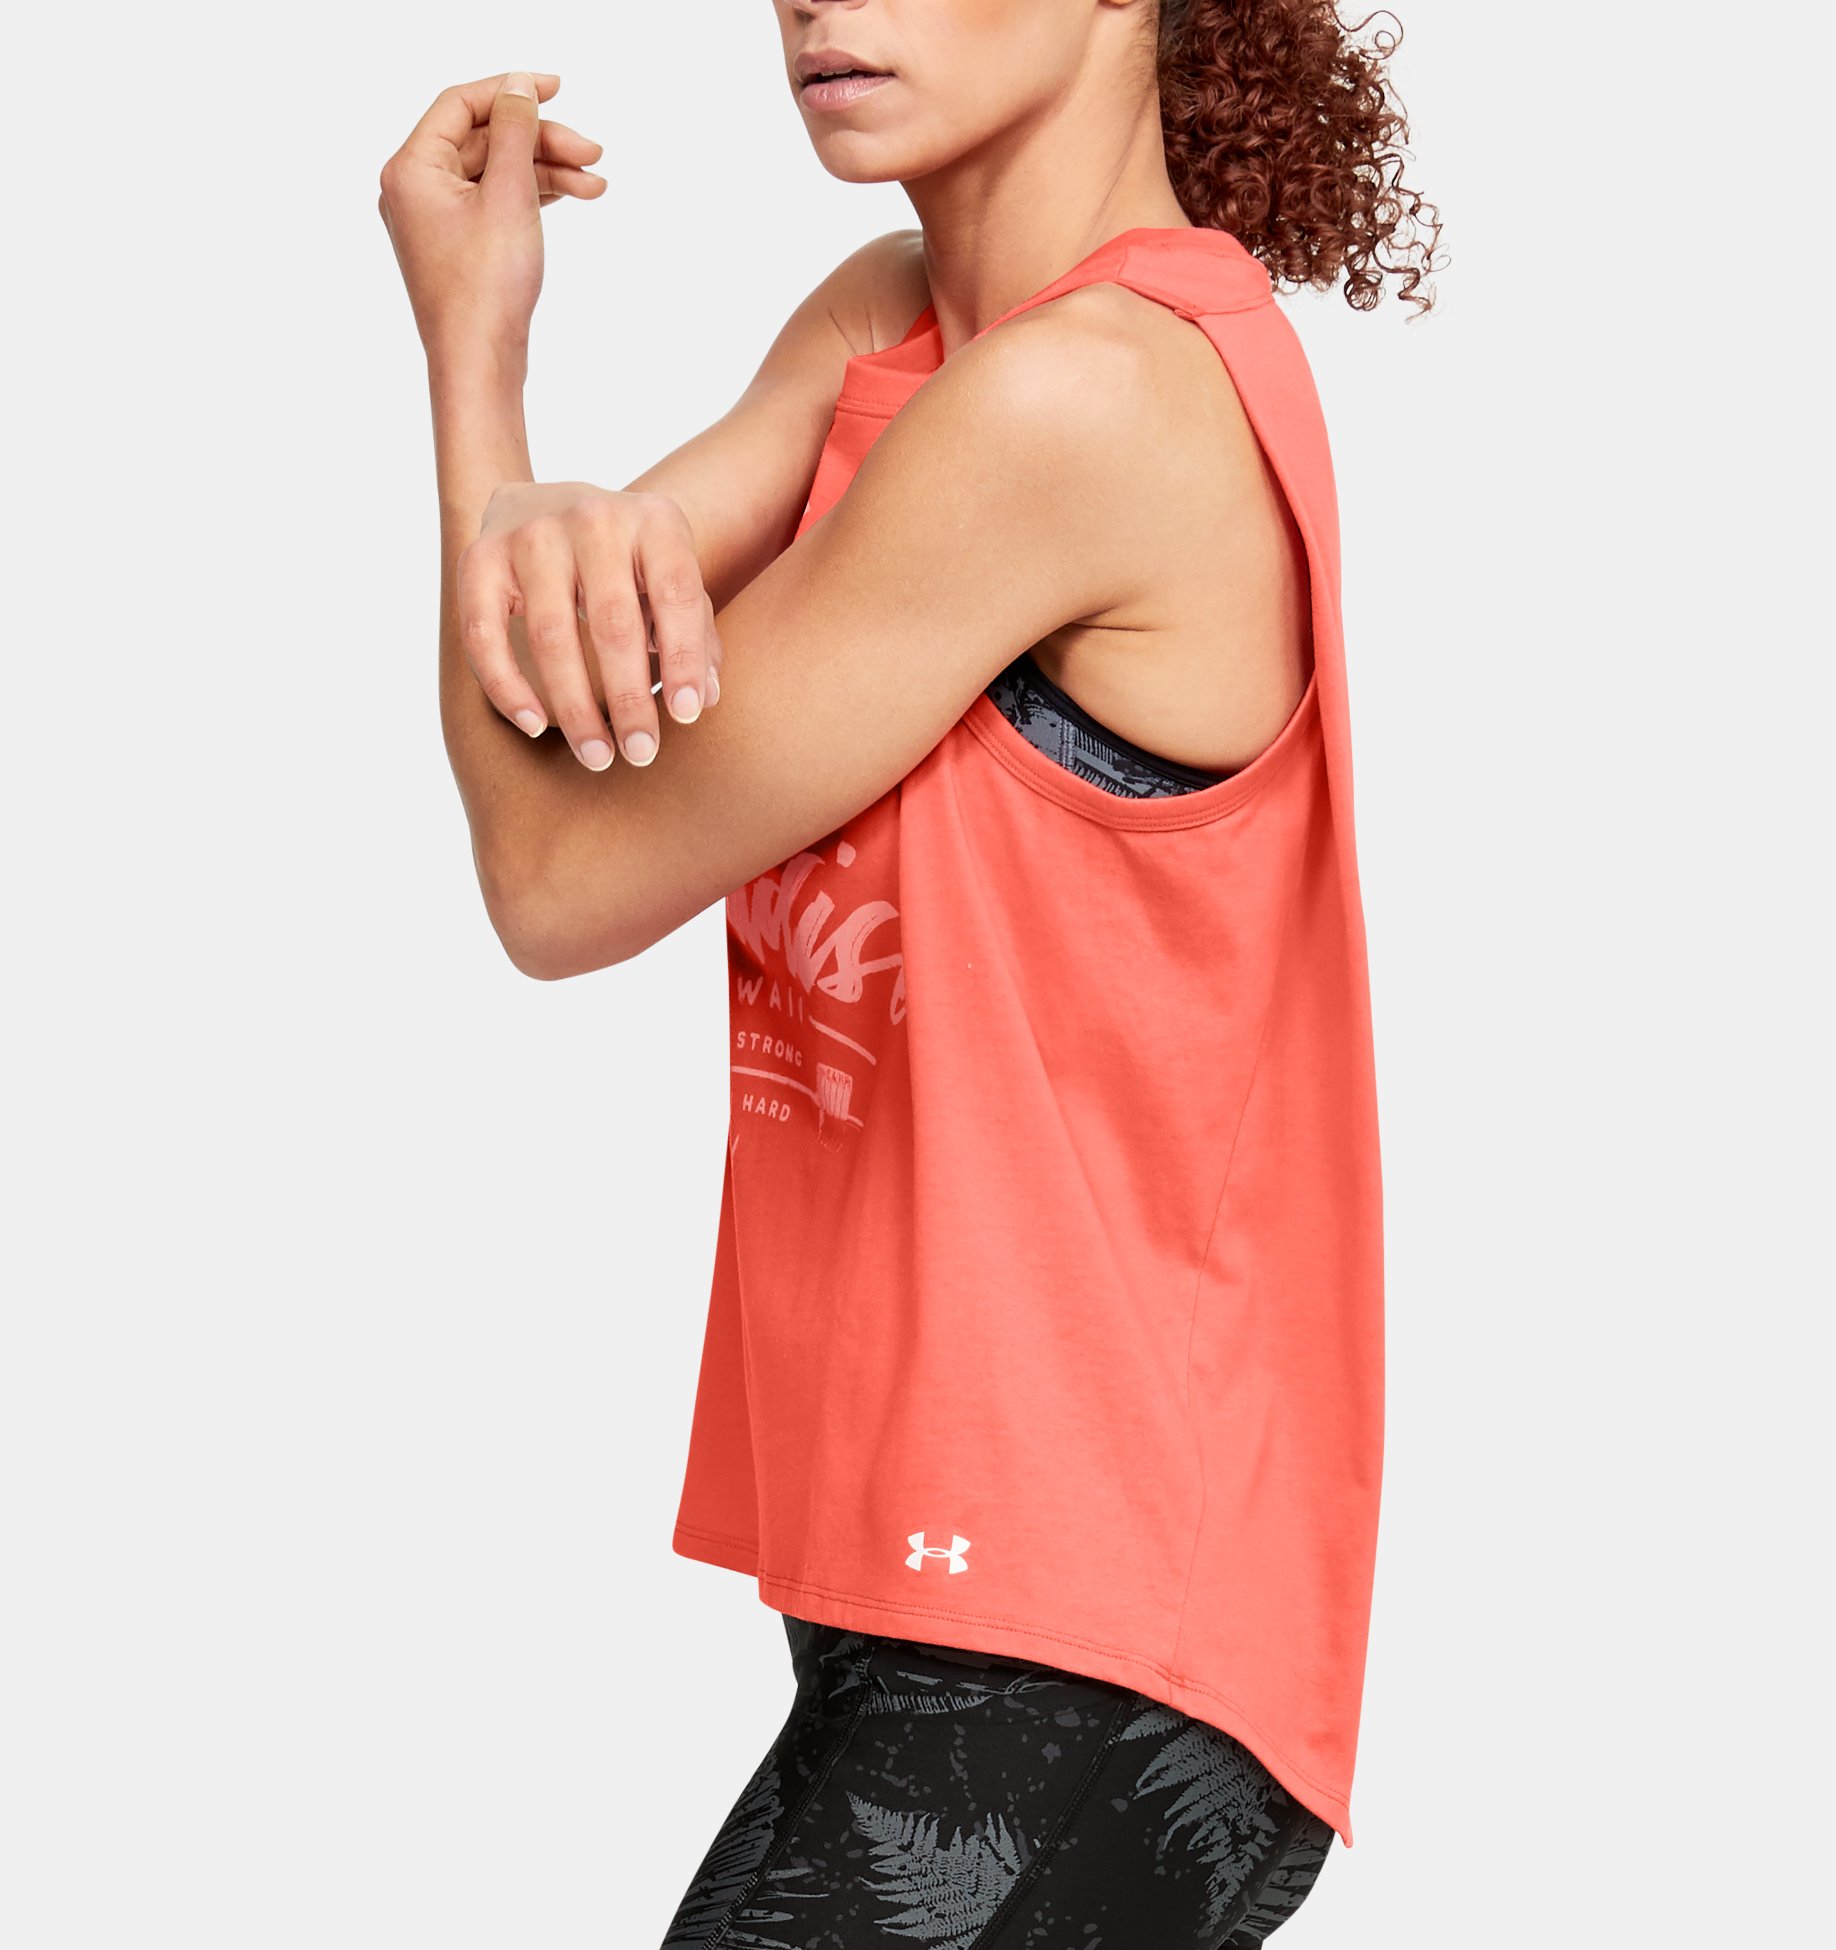 Under Armour Women's Project Rock Aloha Tank Top New 1355713 Size S 